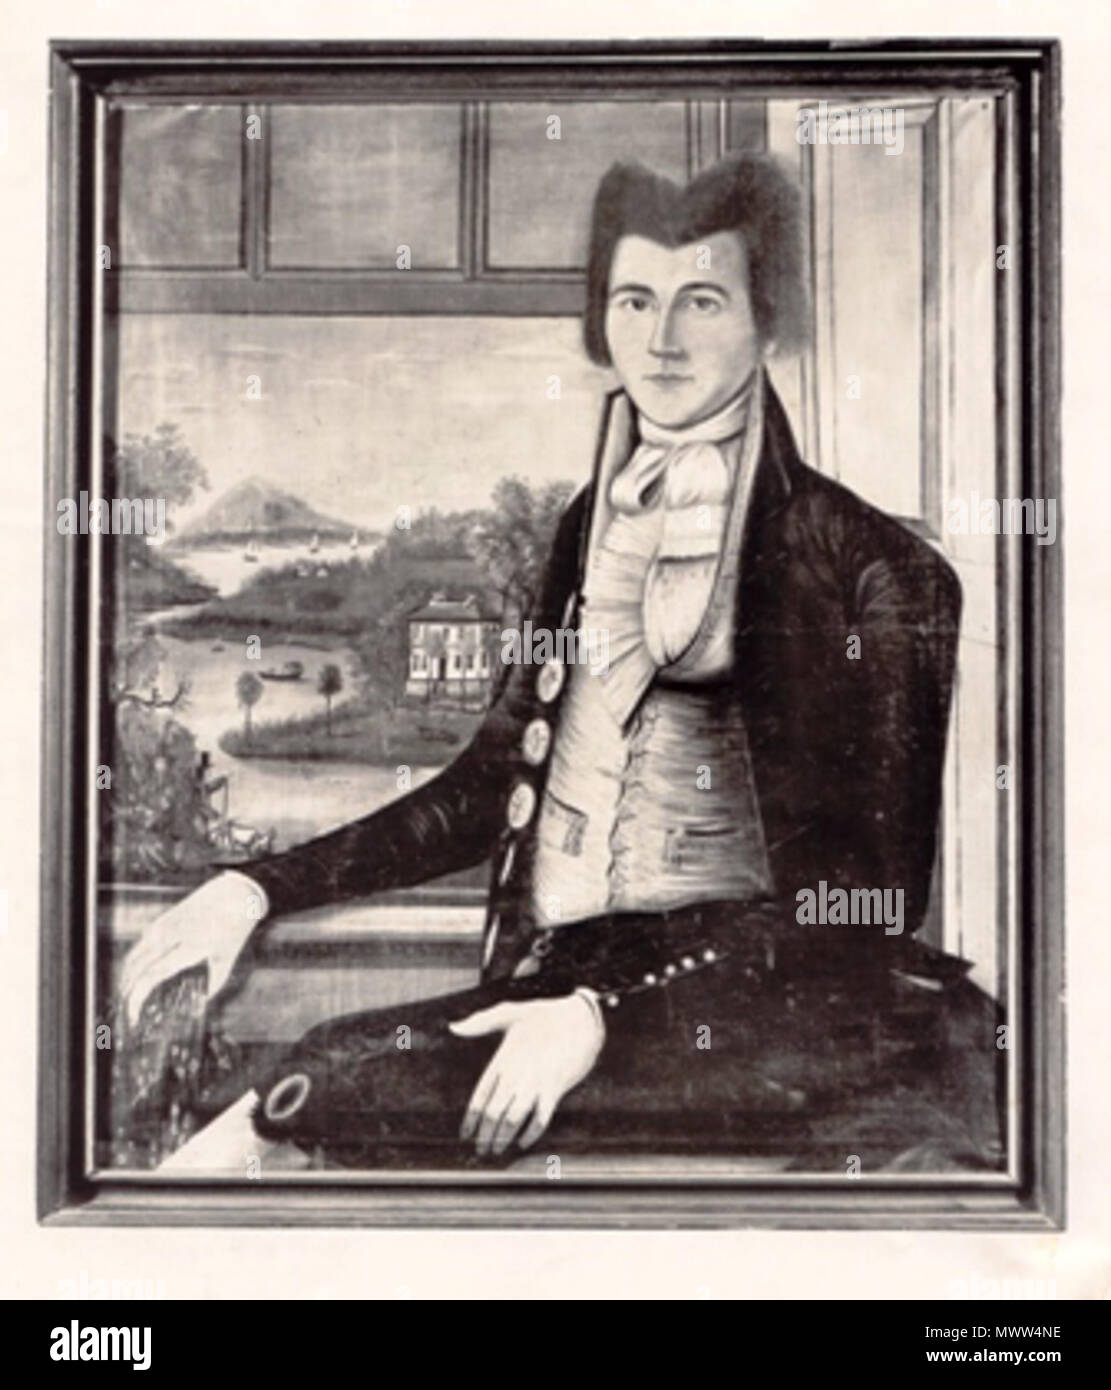 . English: Portrait of composer Timothy Swan (1758-1843), sometime resident of Suffield, Connecticut. Swan was born in Worcester, Mass., and apprenticed as a hat maker. He later briefly attended singing school, and learned to play the flute in 1776 as a member of the Continental Army. Swan is well-known for the hymns he composed. Unknown date (subject died in 1843). Unknown 608 Timothy Swan composer Stock Photo